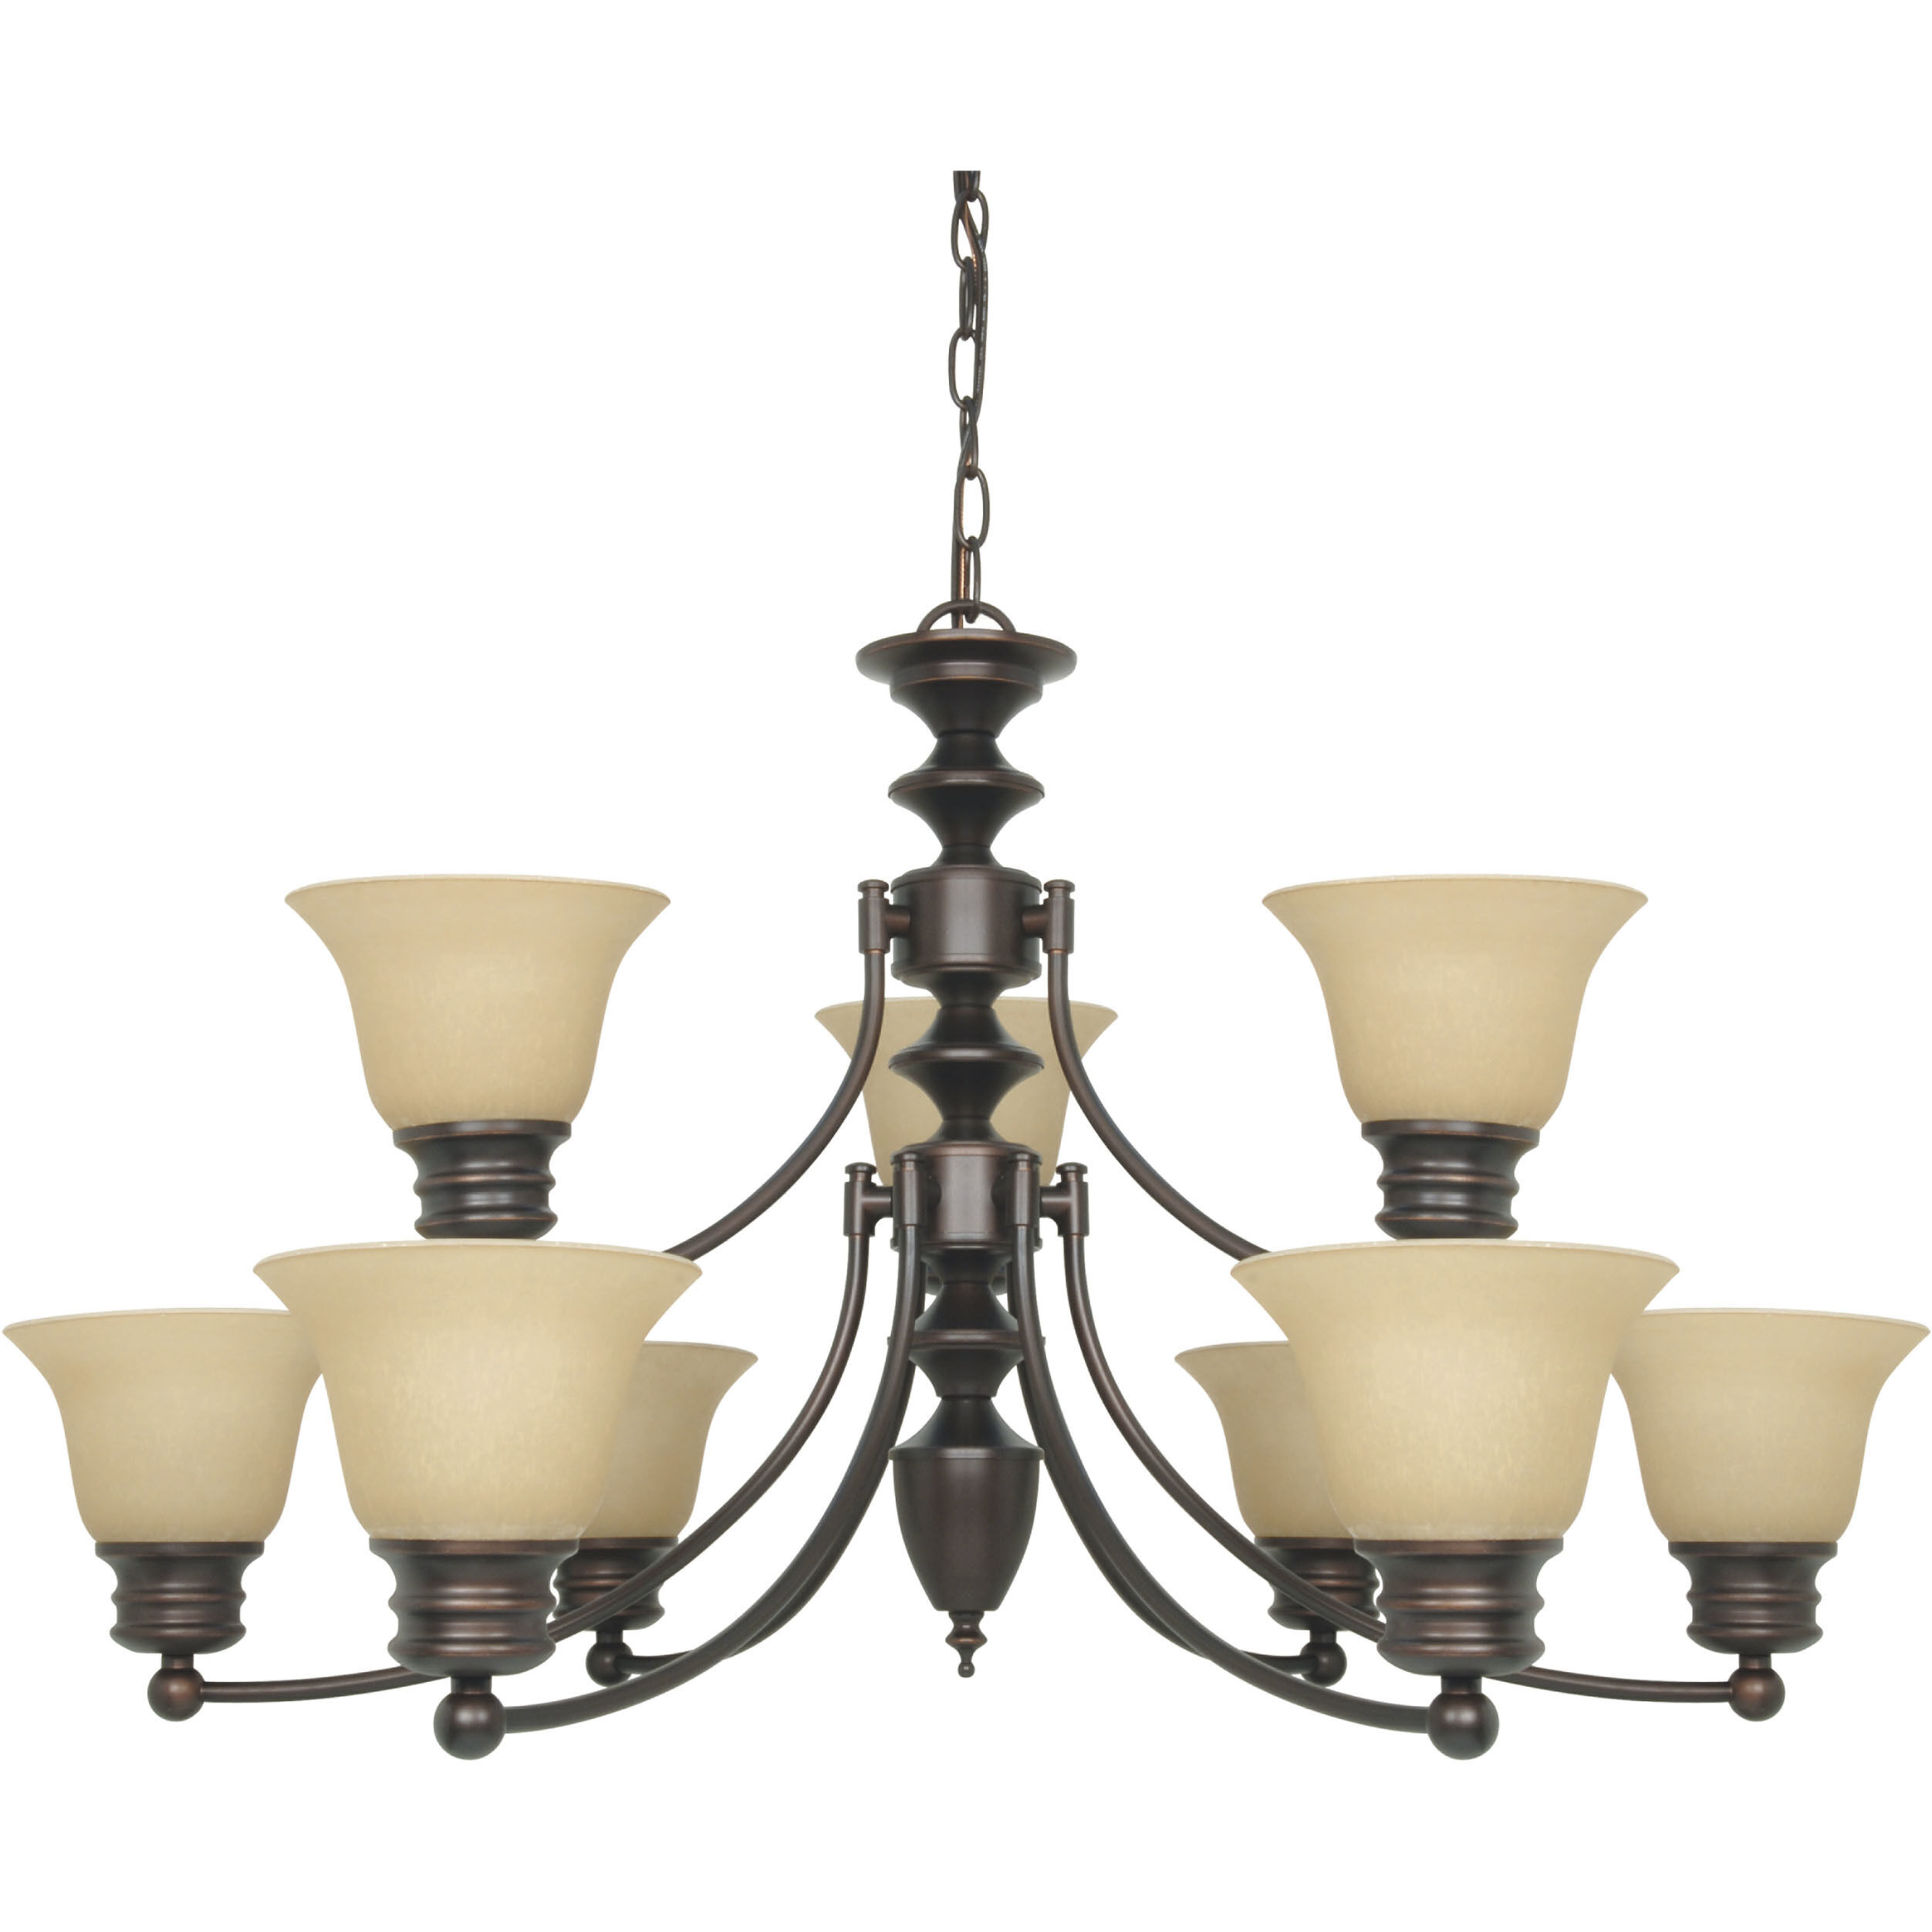 Nuvo 60/1274 Empire 6 Light Chandelier with Champagne Glass-